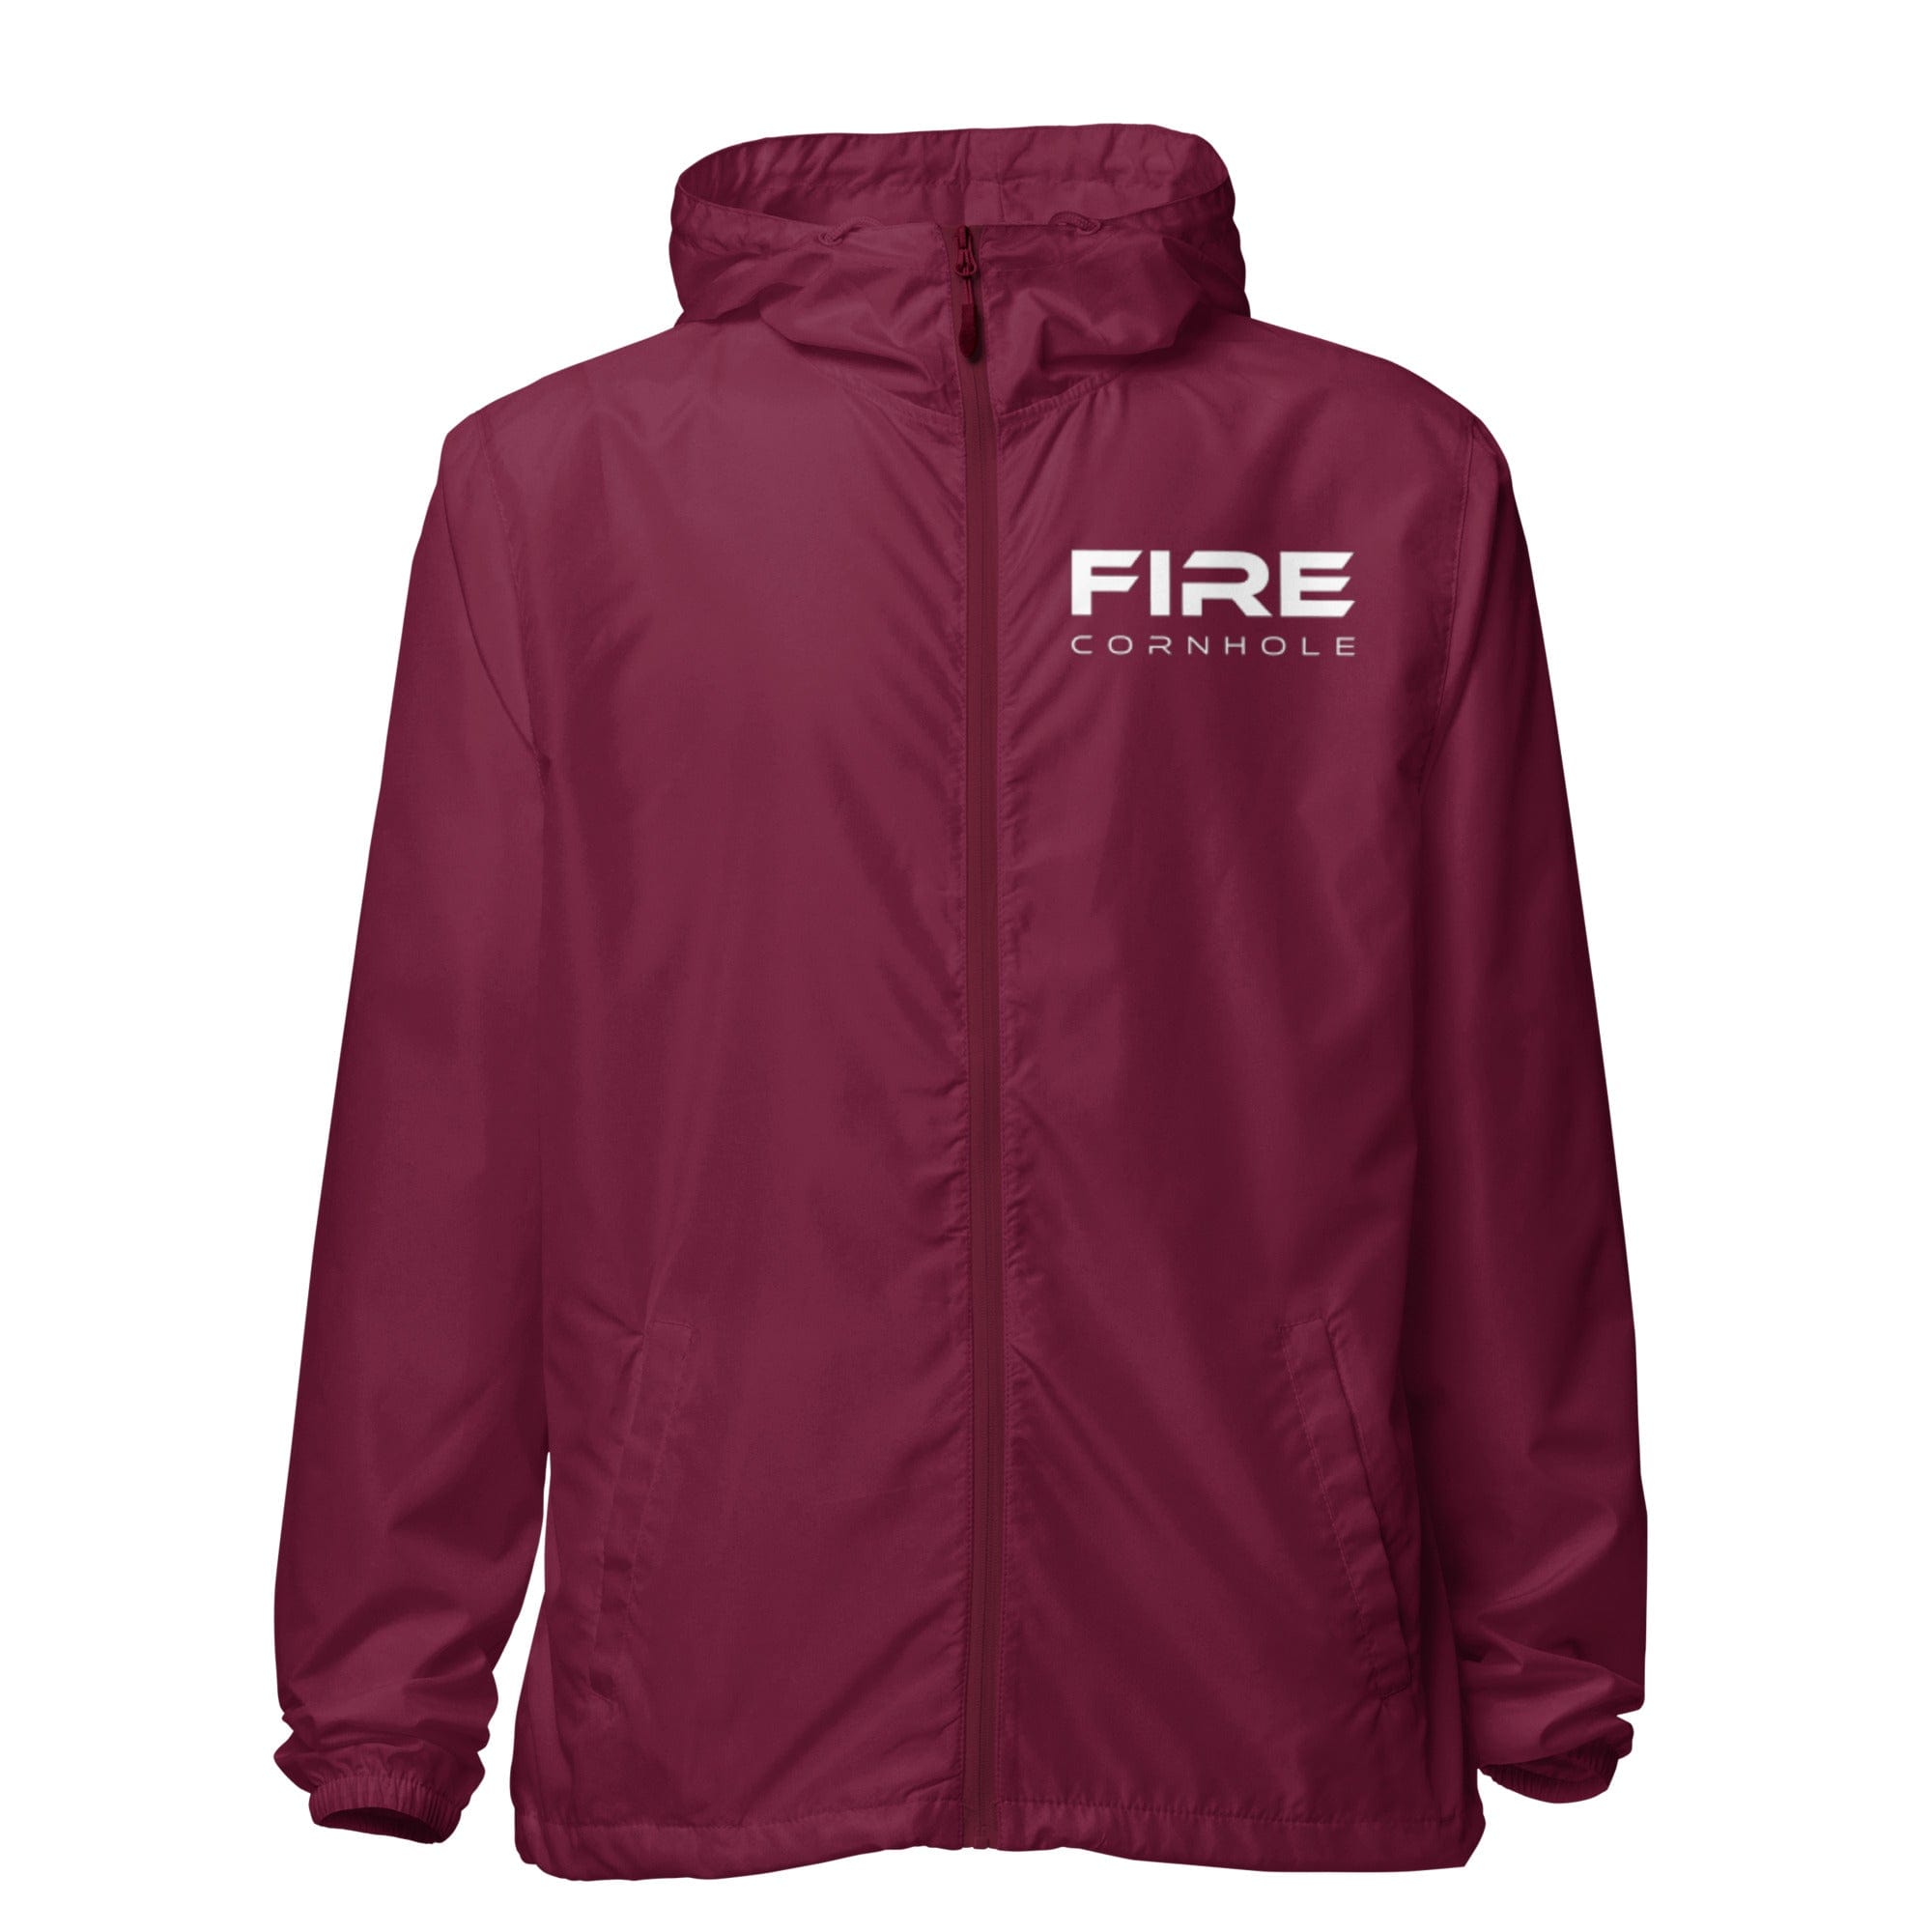 Front view of burgundy unisex zip-up windbreaker with Fire cornhole logo in white